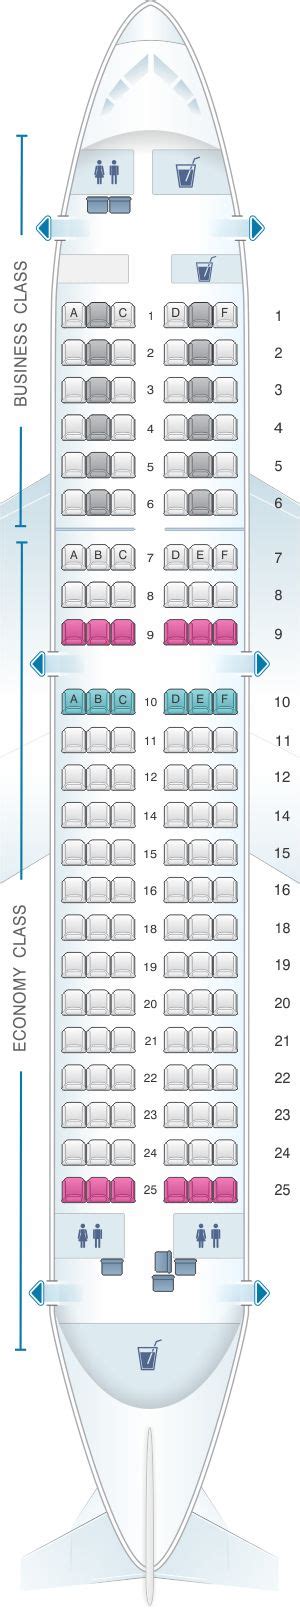 Seat Map Lufthansa Airbus A319 Air Transat Asiana Airlines China